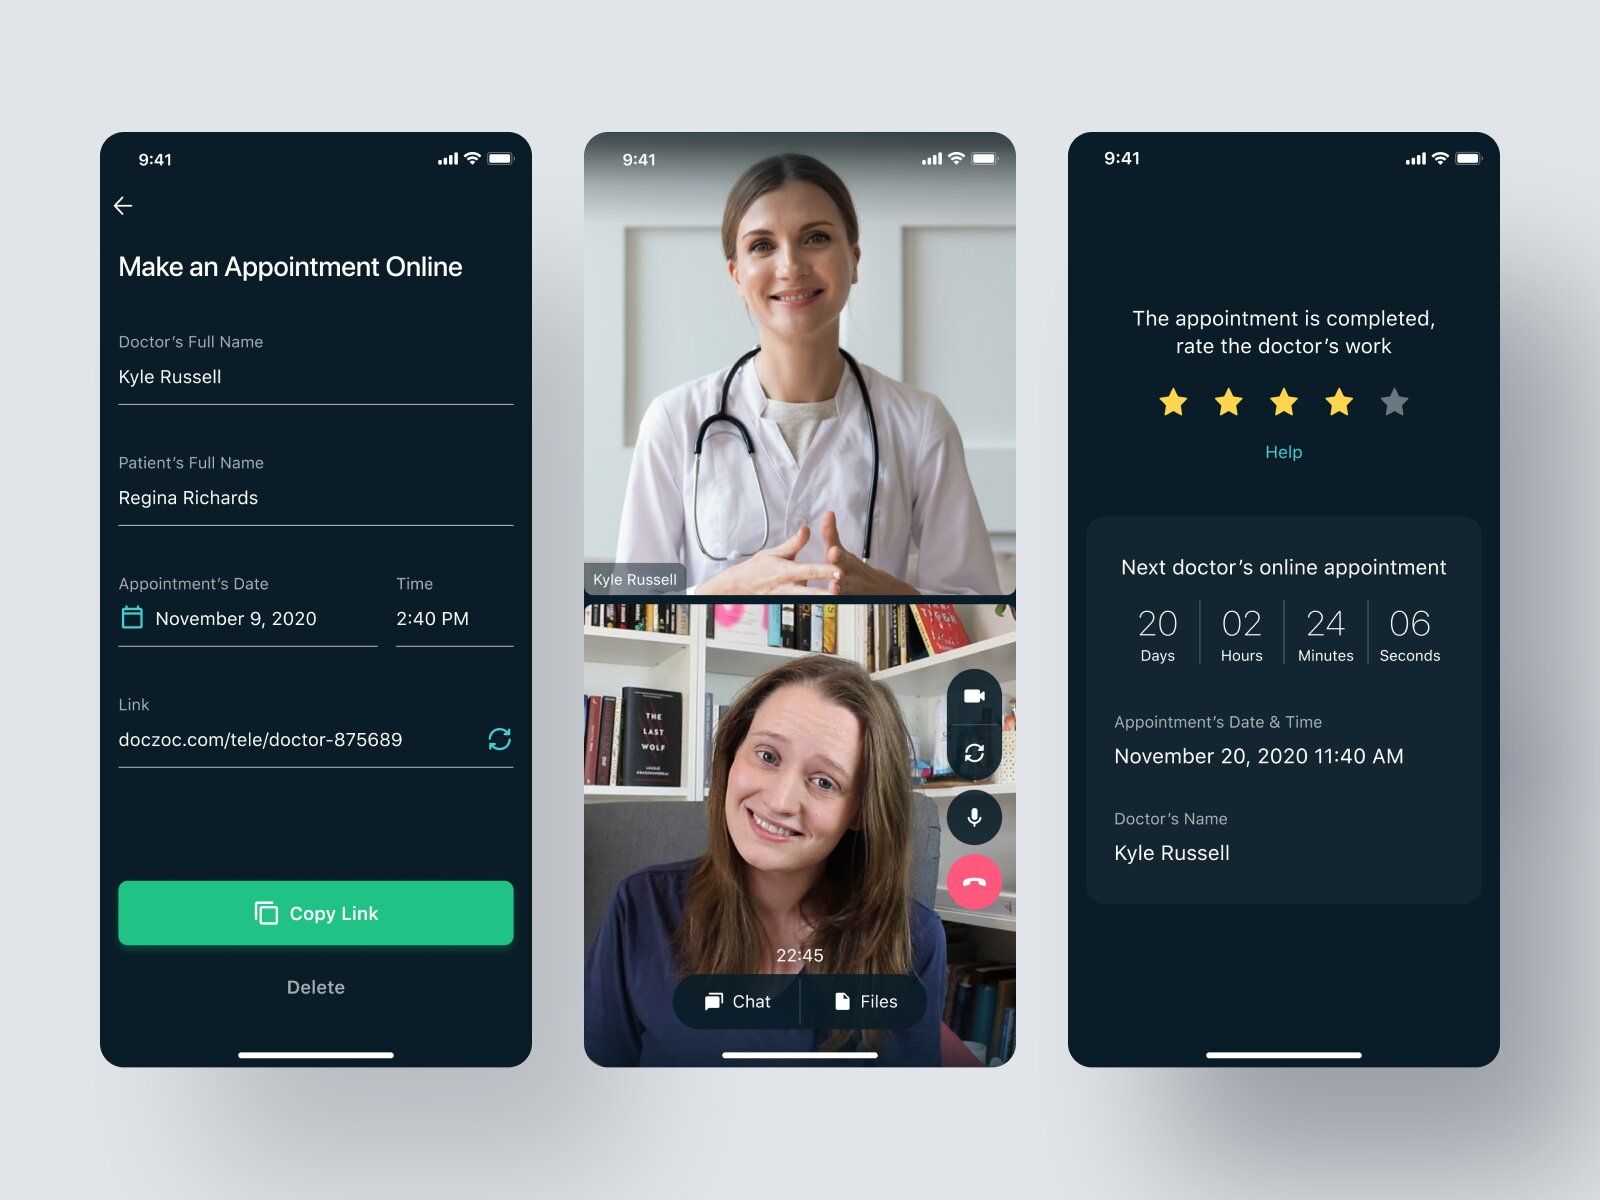 Feedback form in a telemedicine mobile app after an appointment 